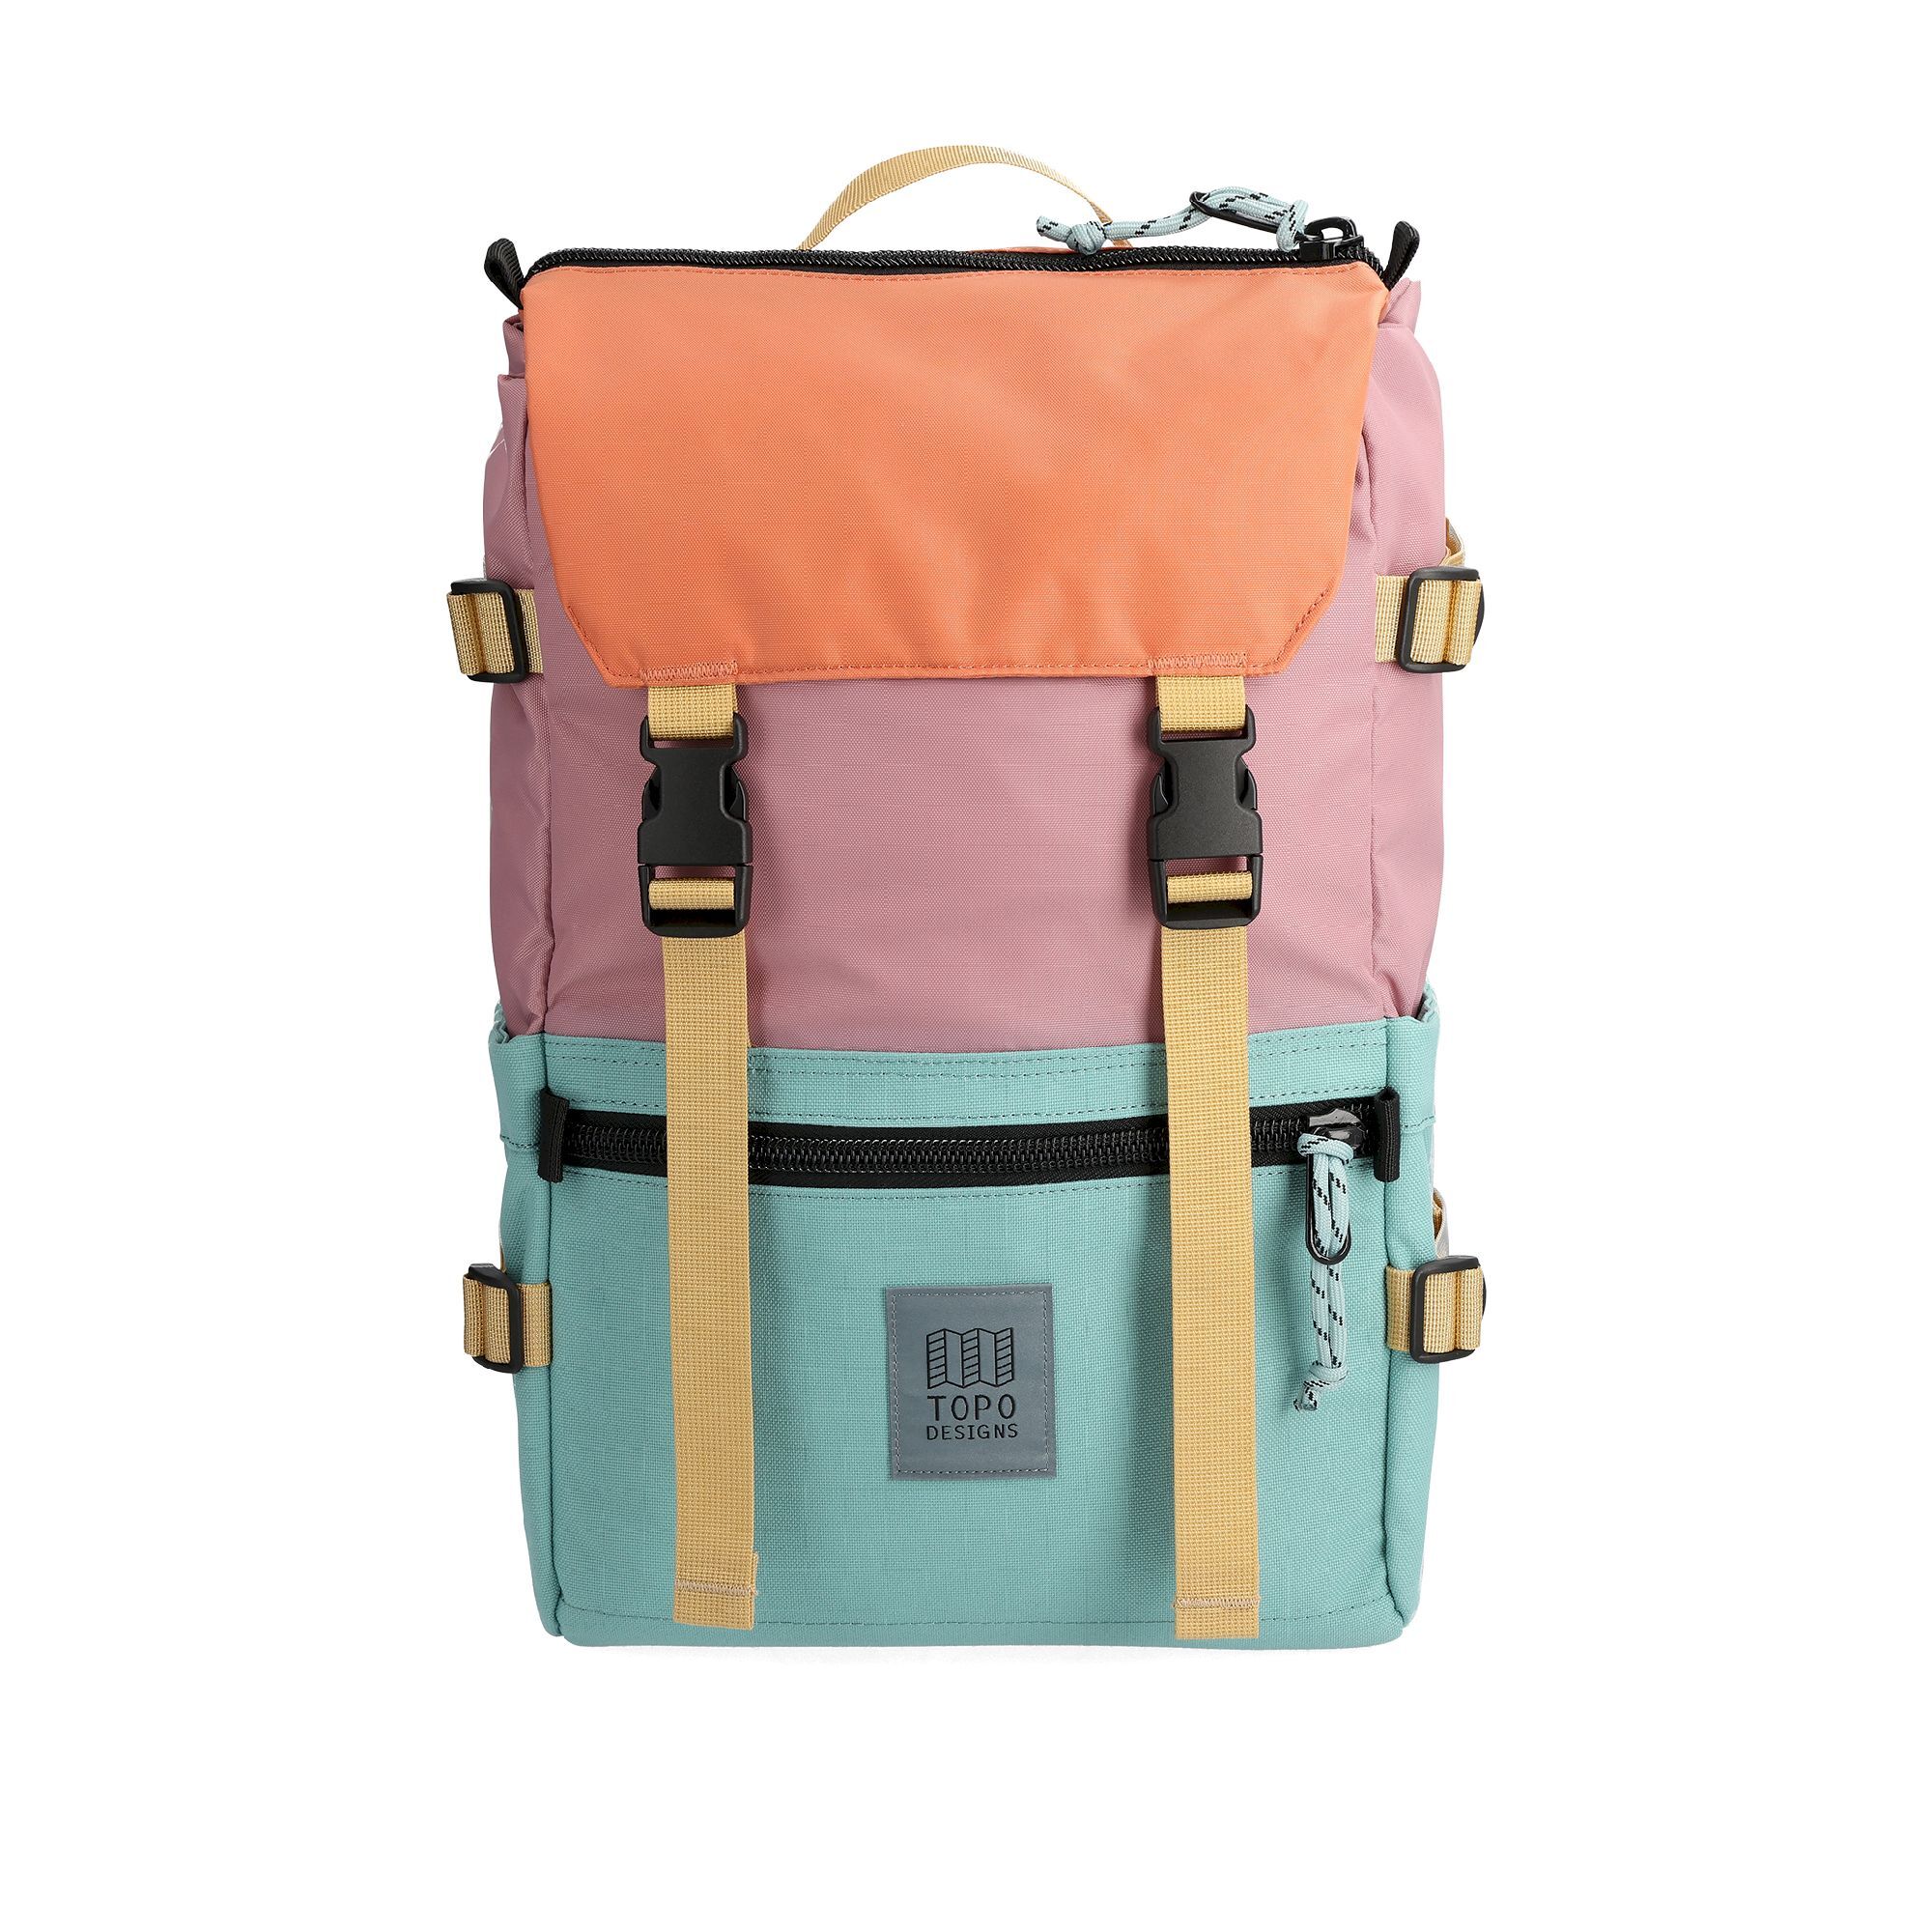 Topo Designs Rover Pack Classic - Sac à dos | Hardloop